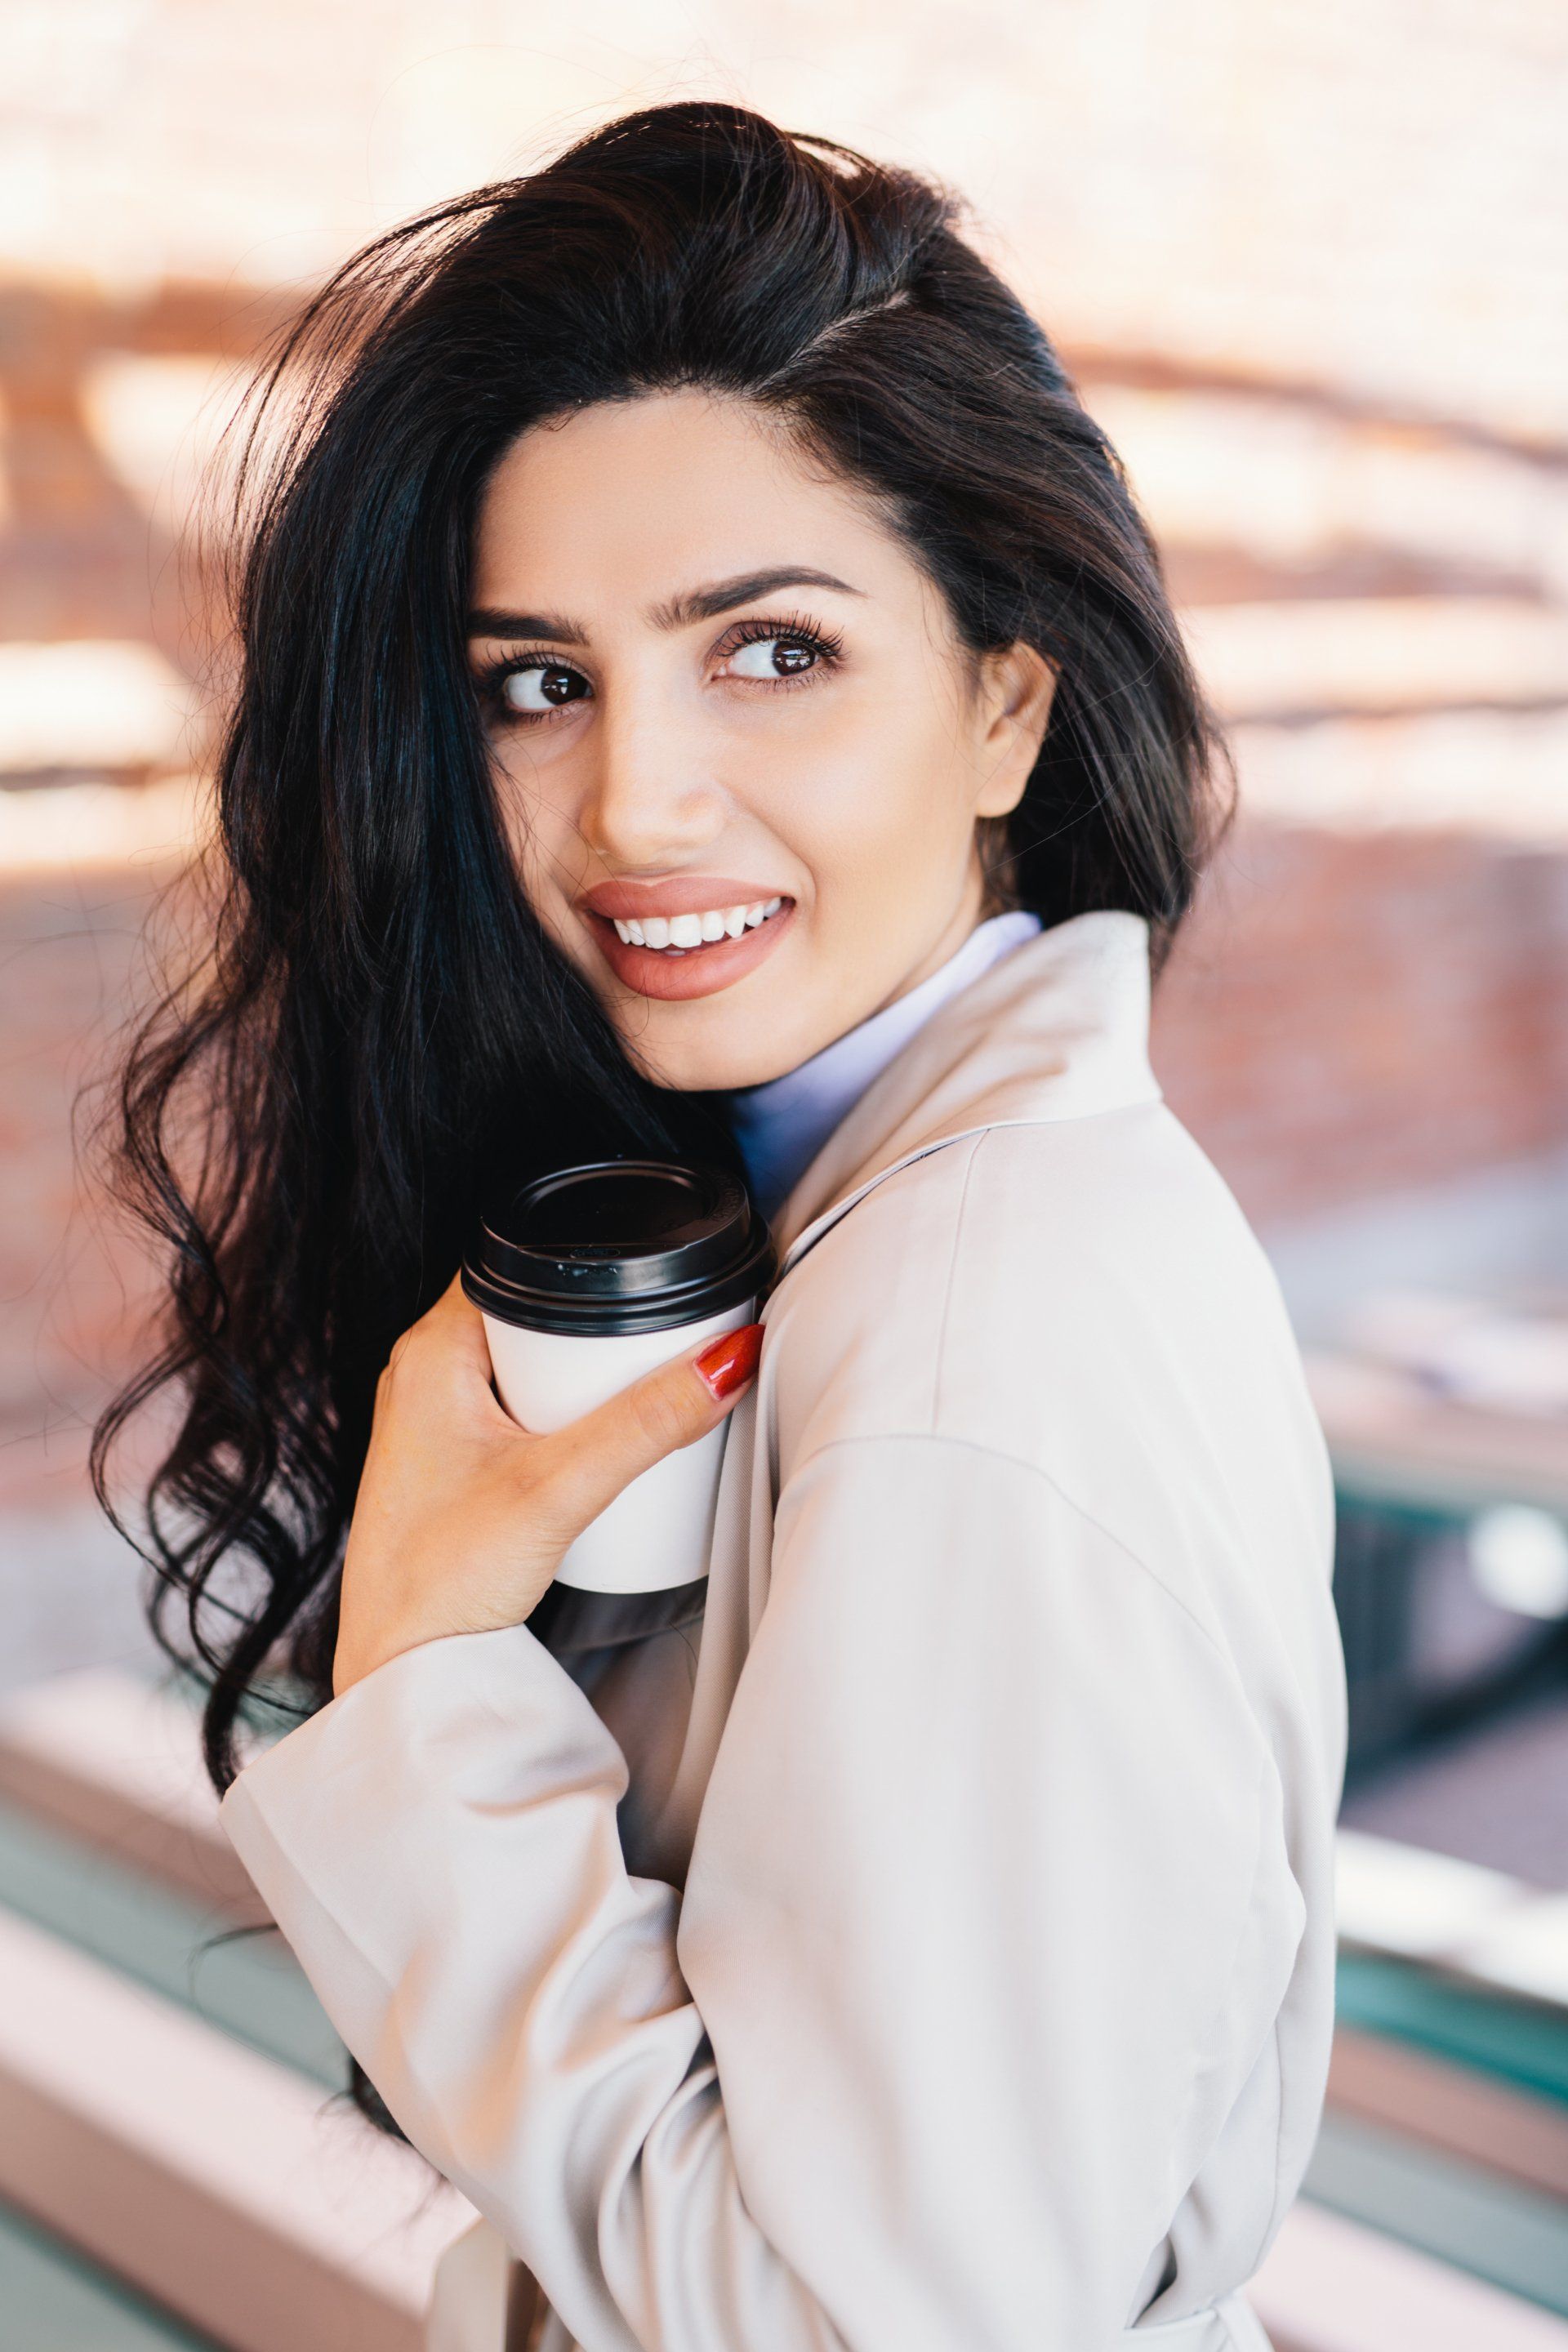 beautiful woman with long black hair holding a coffee